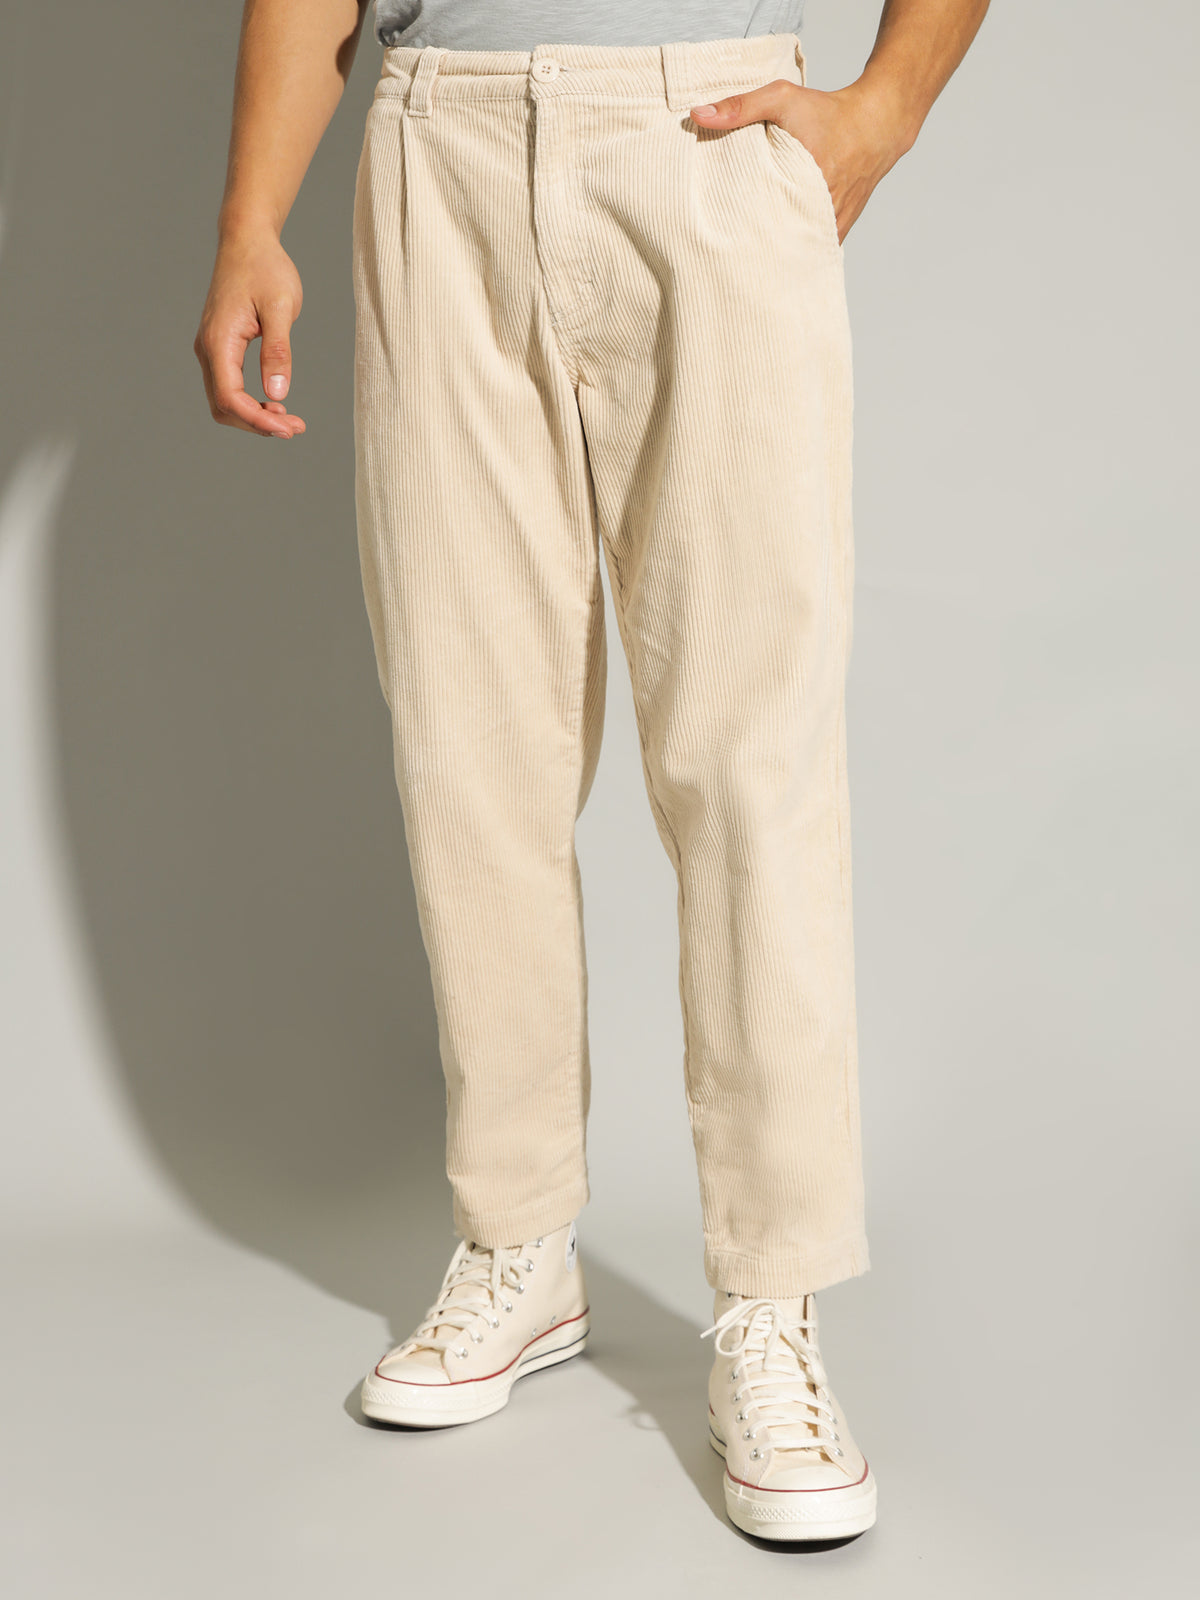 Oakes Cord Pant in Stone